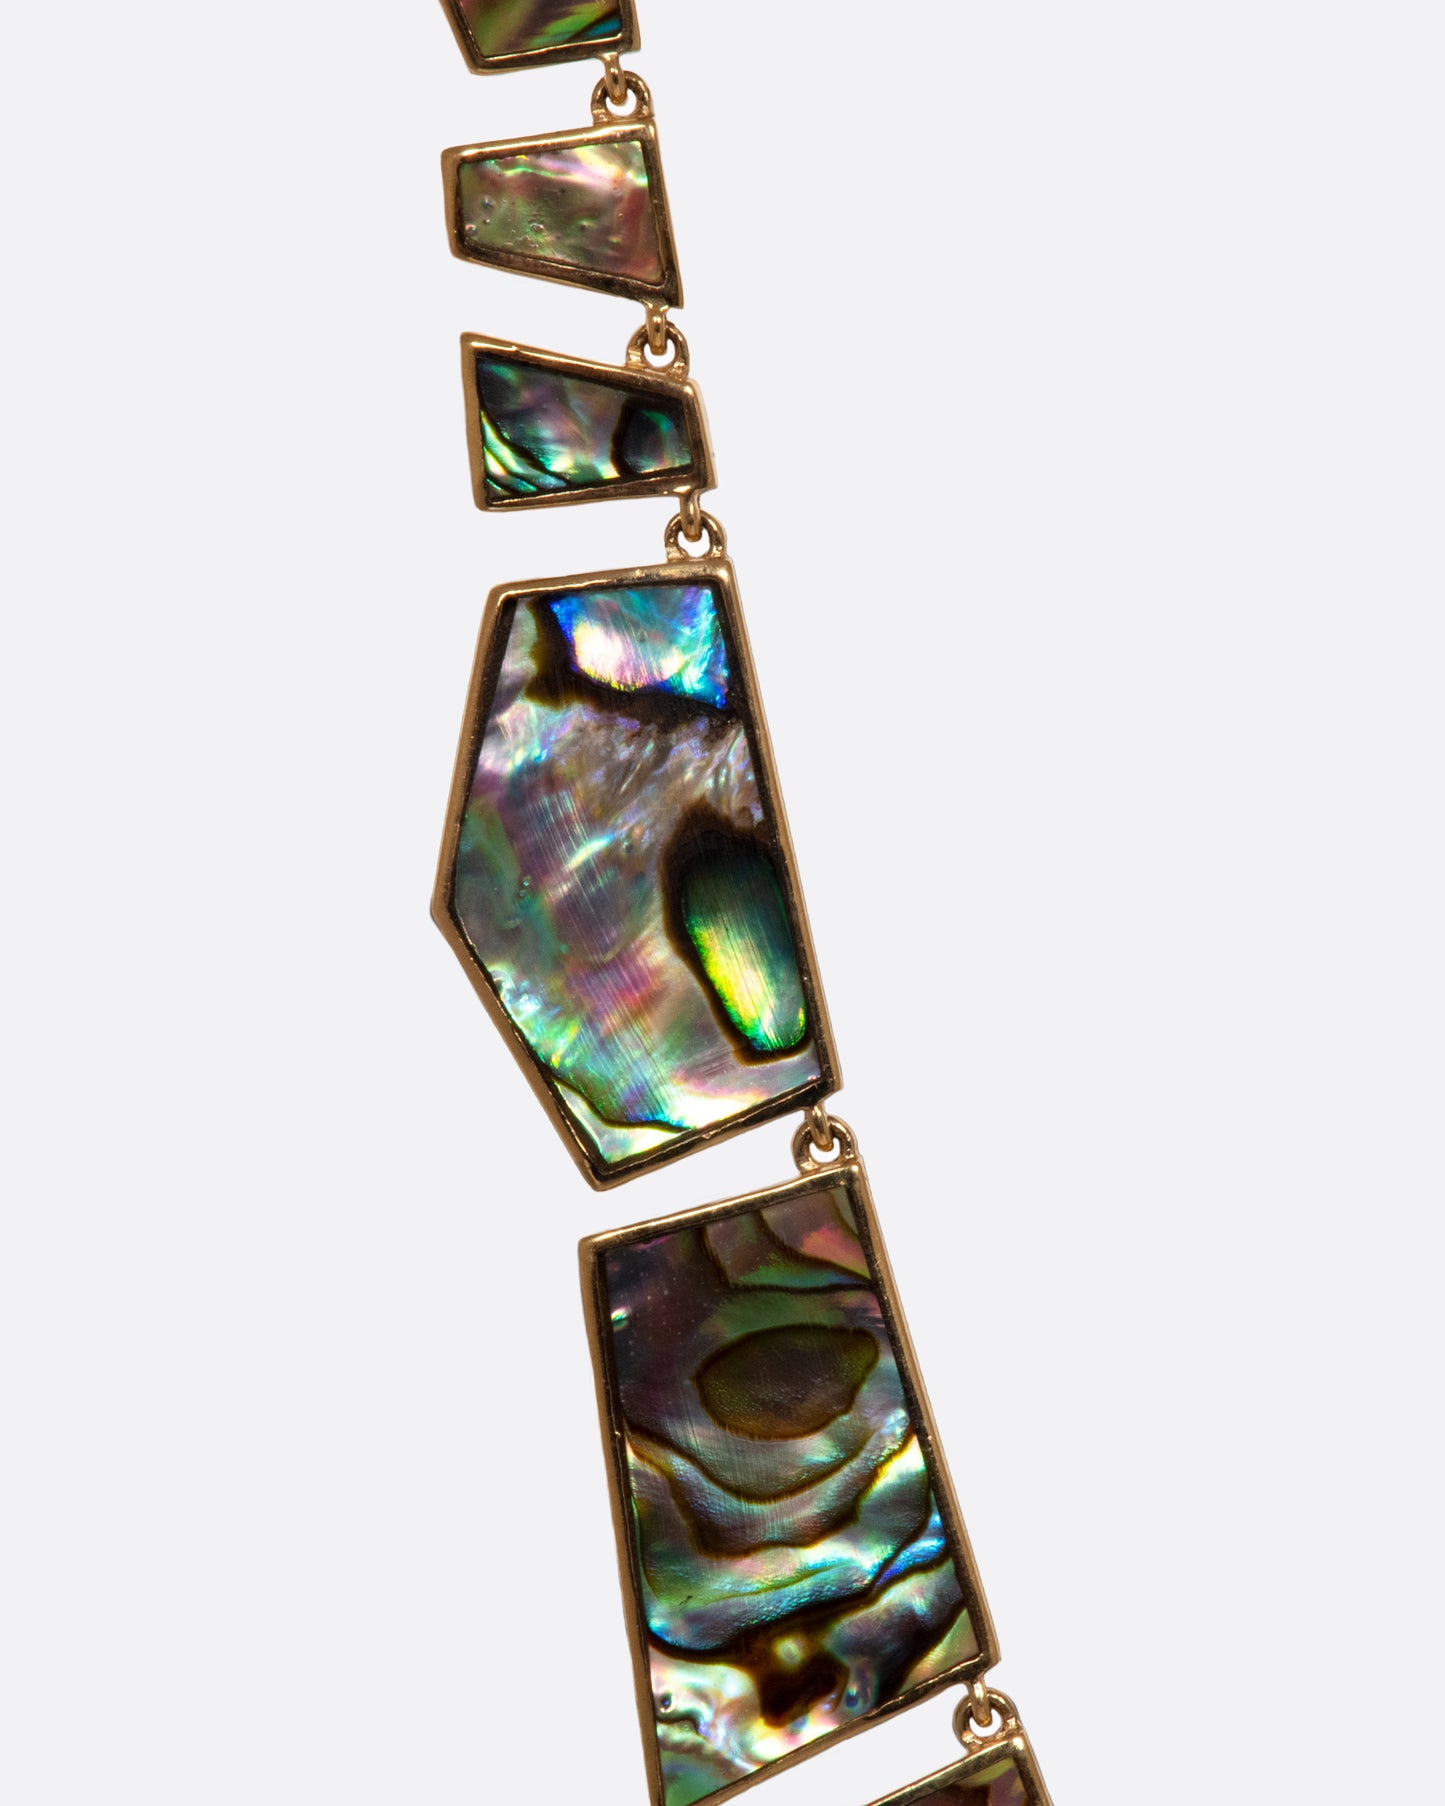 A mosaic necklace of geometric abalone shell pieces.